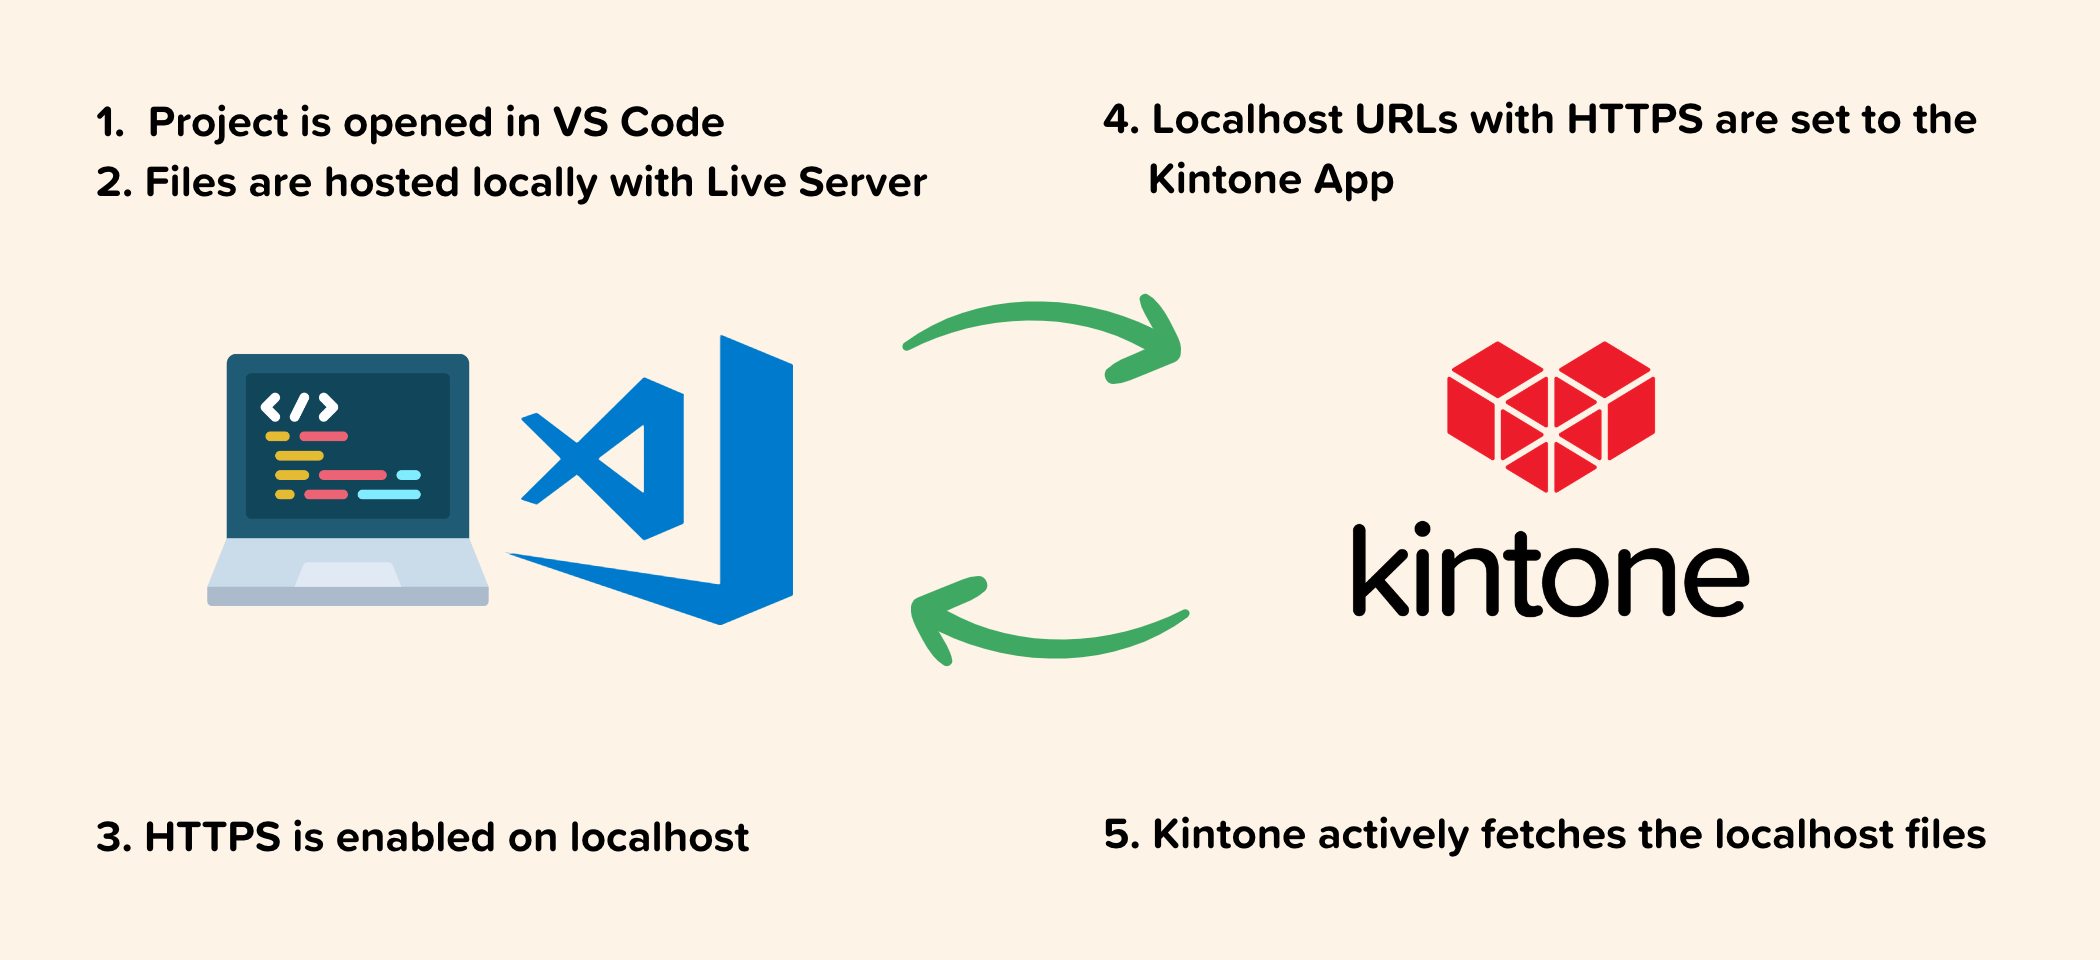 Image: An illustration of the processes involved in syncing the local code with a Kintone App.